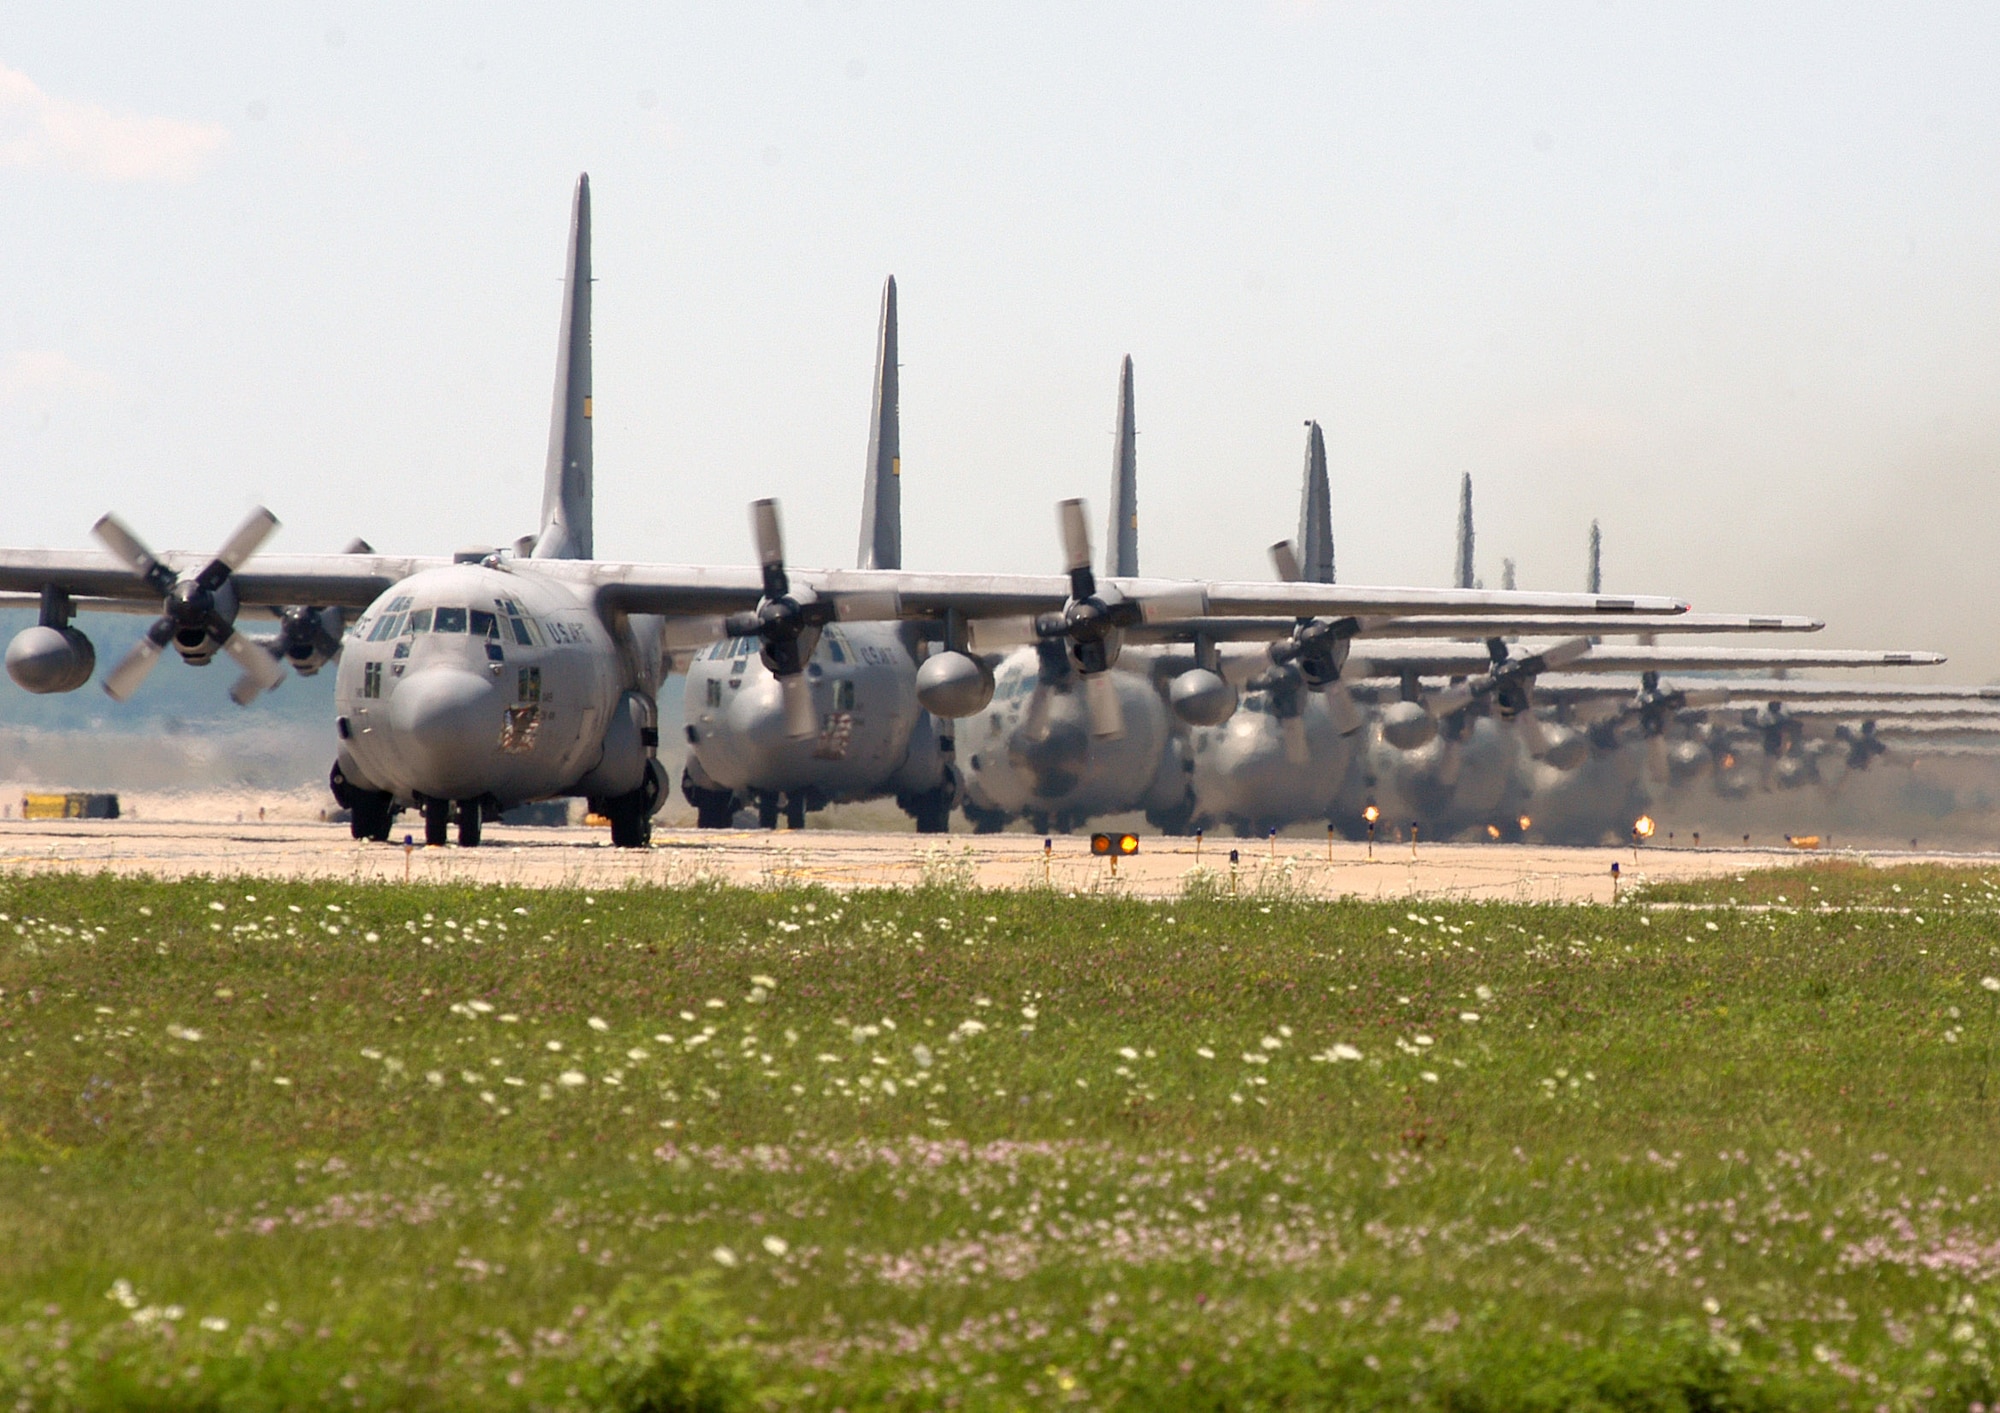 Eight C-130 Hercules aircraft from the Air Force Reserve Command's 911th Airlift Wing return home to Pittsburgh Air Reserve Station, Pa., after participating in Exercise Bold Effort July 14.  The purpose of this training exercise was to maintain unit proficiency in re-supplying ground forces during combat operations.  (U.S. Air Force photo/Senior Airman Jamie Perry)